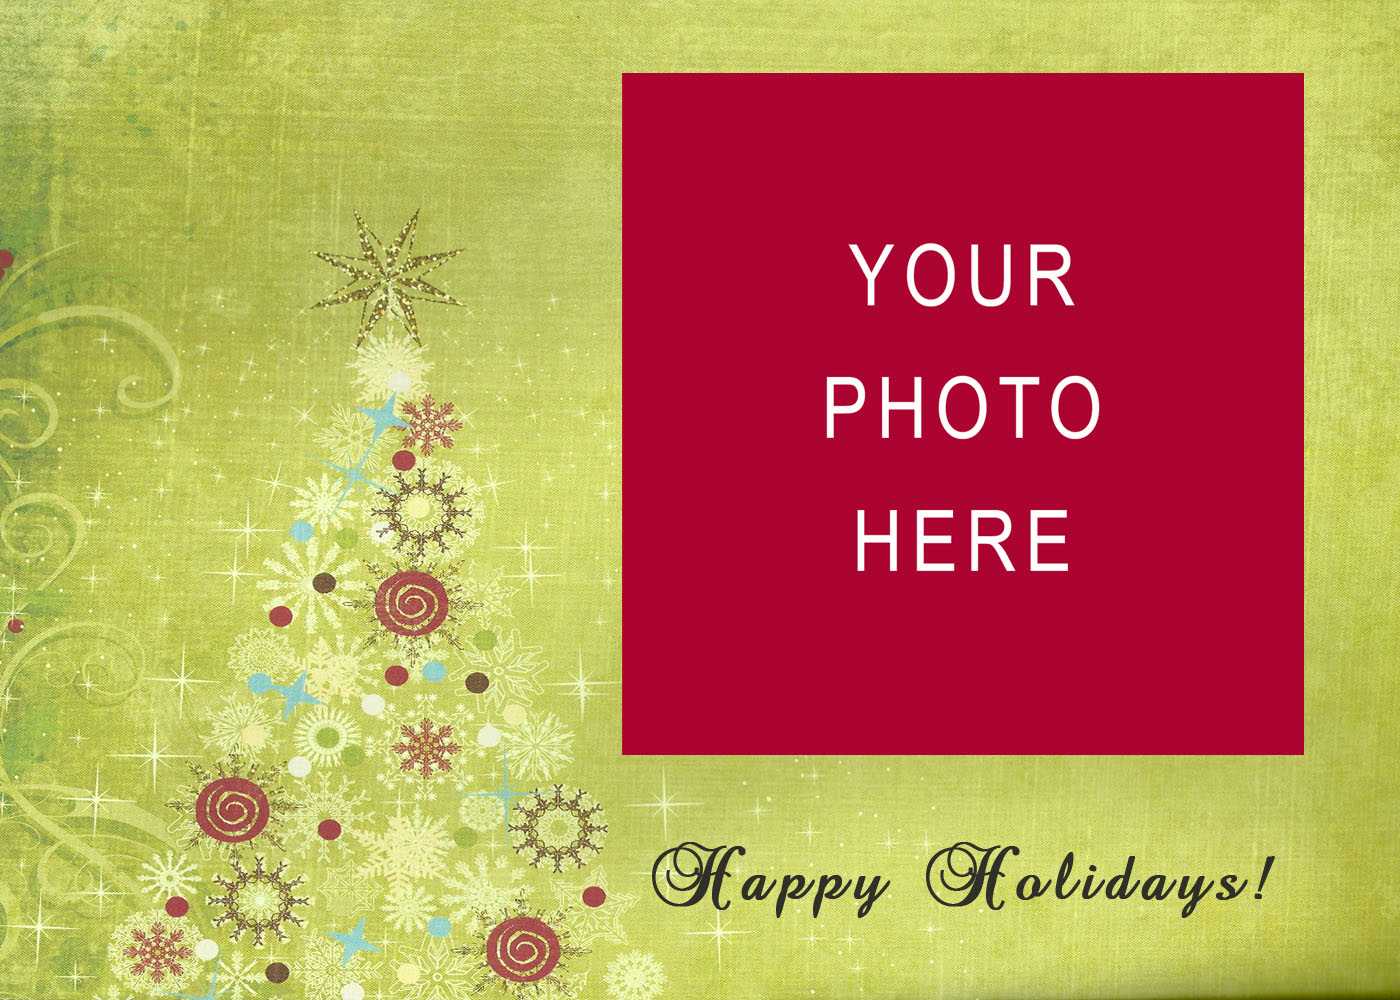 11 Christmas Card Templates Free Download Images – Christmas With Regard To Christmas Photo Cards Templates Free Downloads